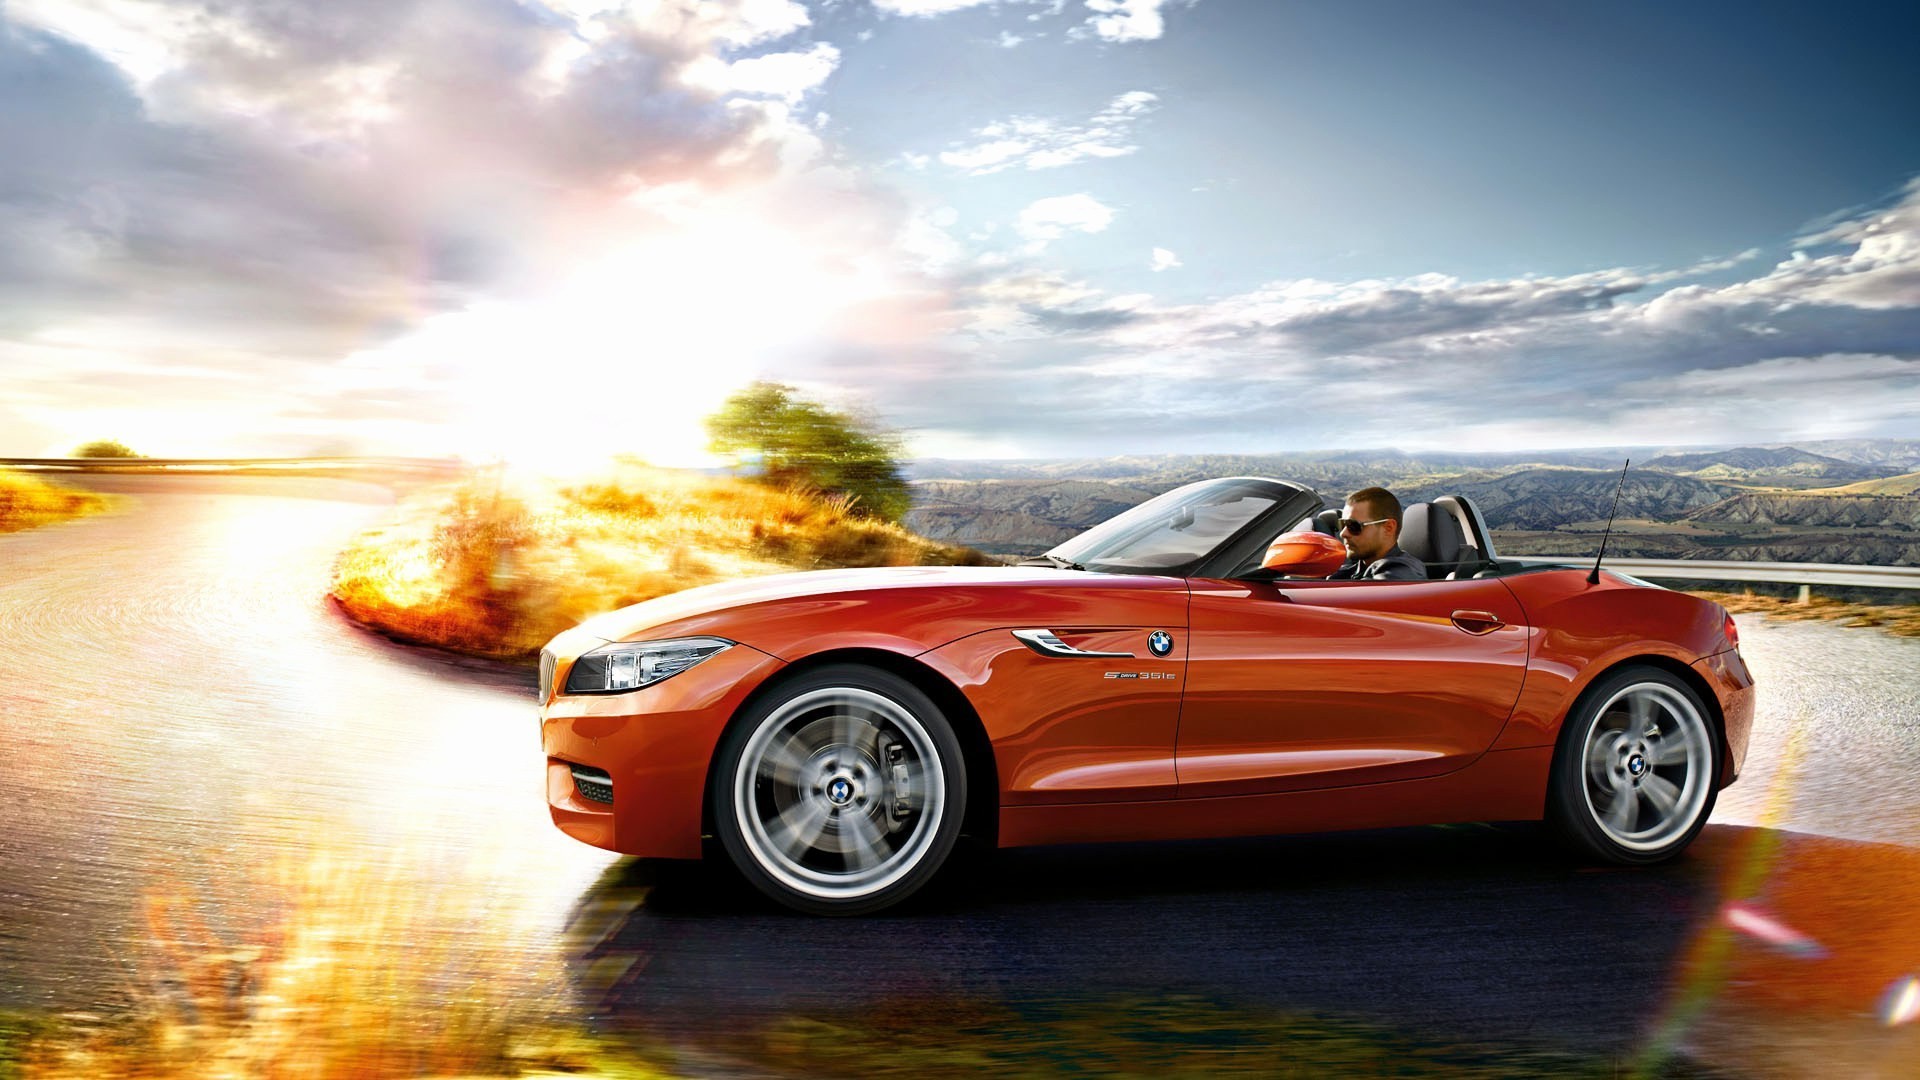 1920x1080 Awesome Wallpapers Hd Fresh Bmw Z4 Wallpaper Available For Iphone